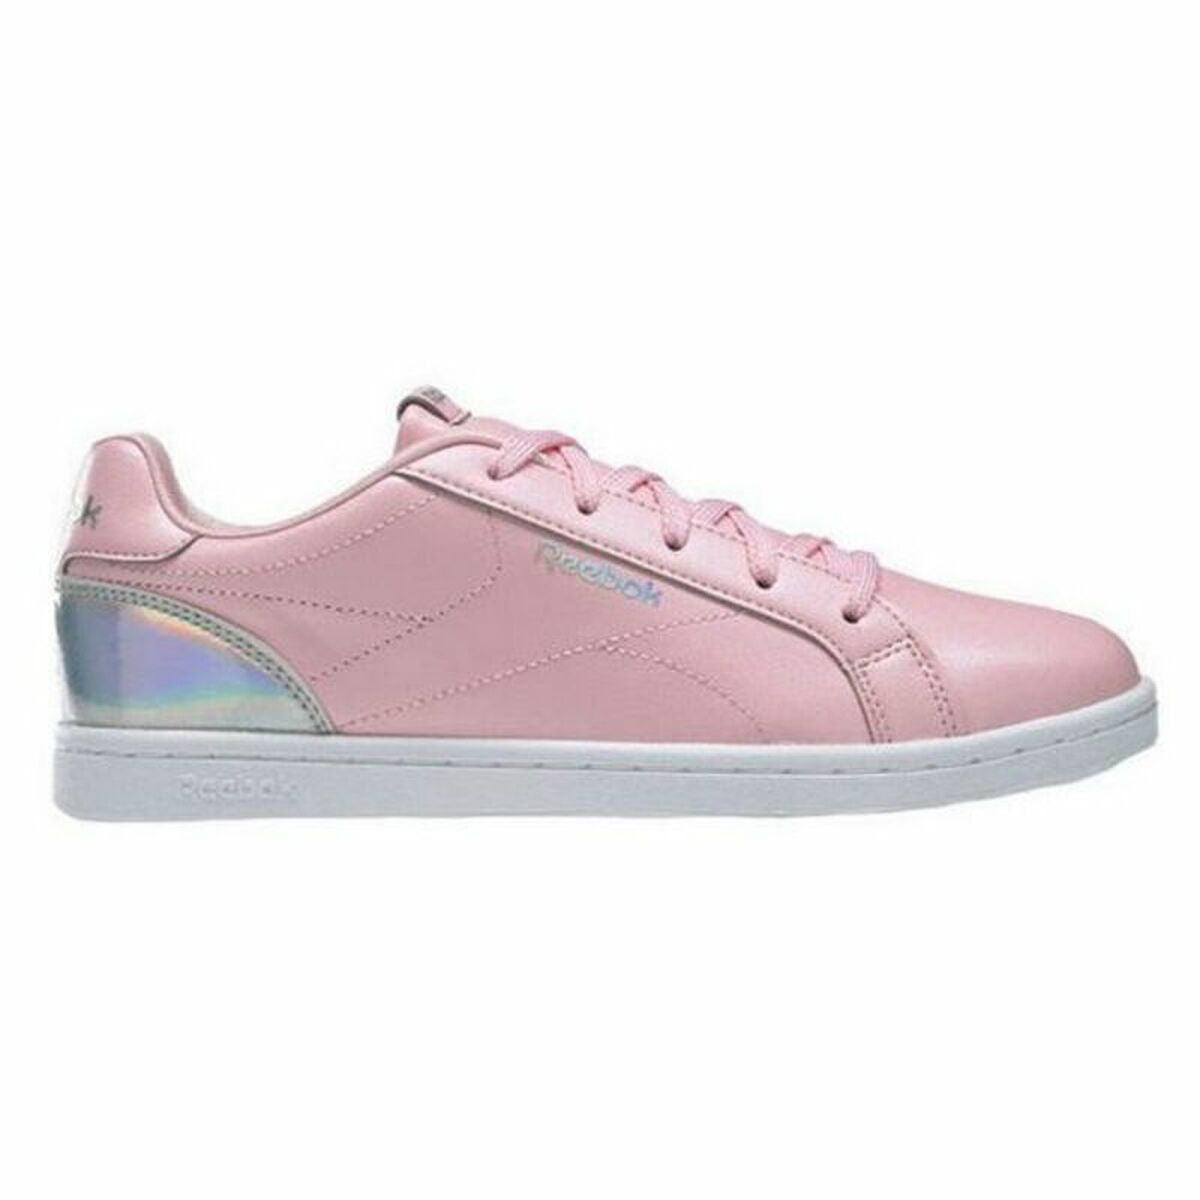 Unisex Casual Trainers Reebok Royal Complete Clean Pink